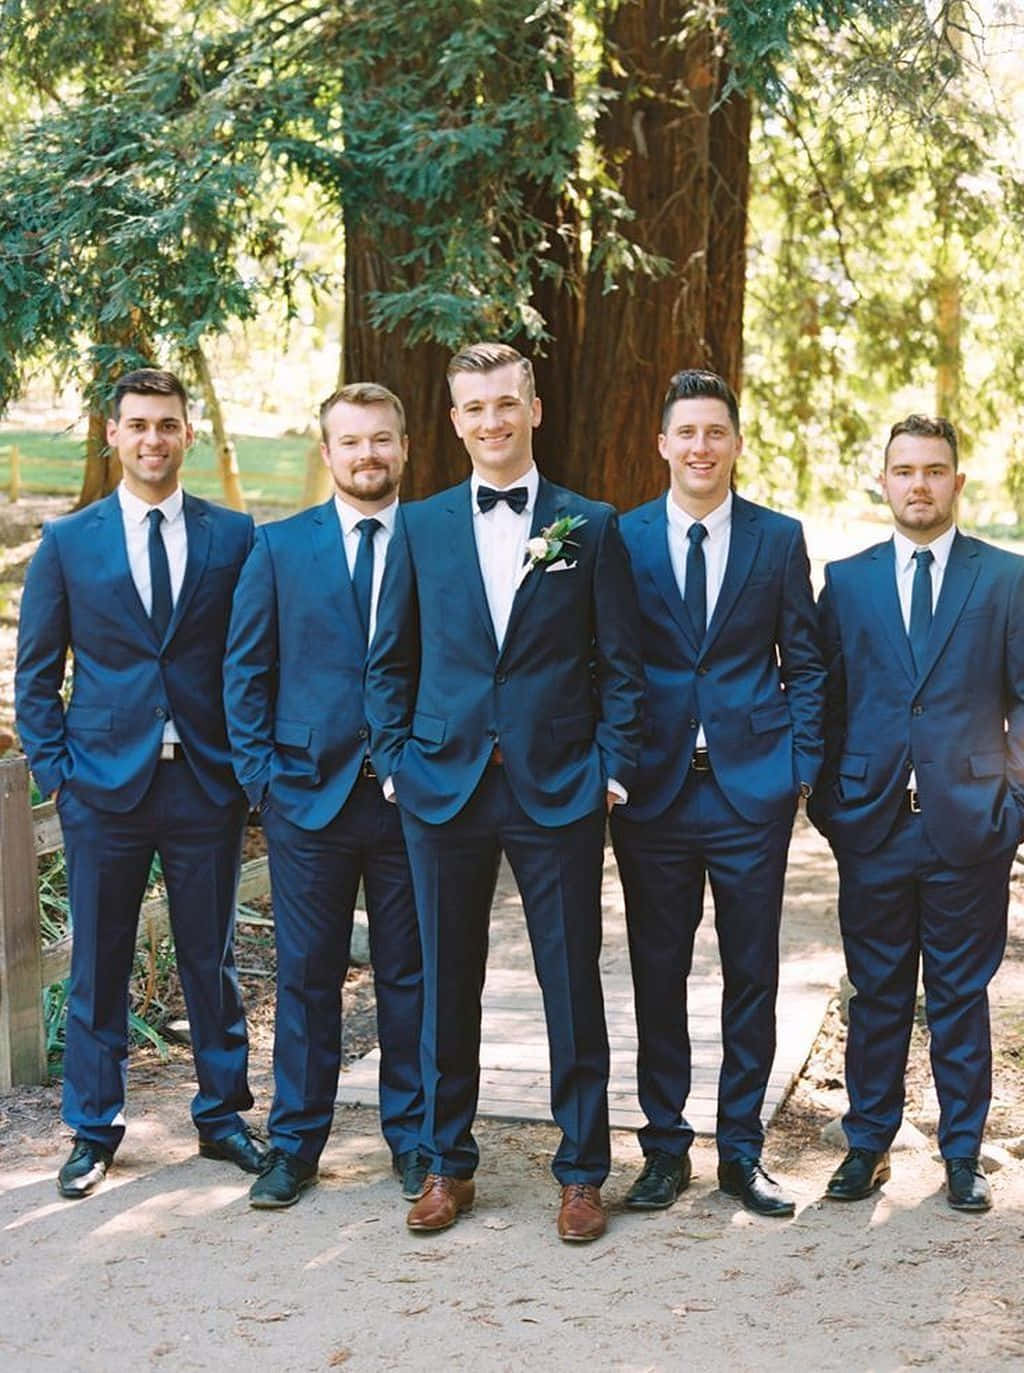 The Groom and his Groomsmen suited up and ready for the Wedding!